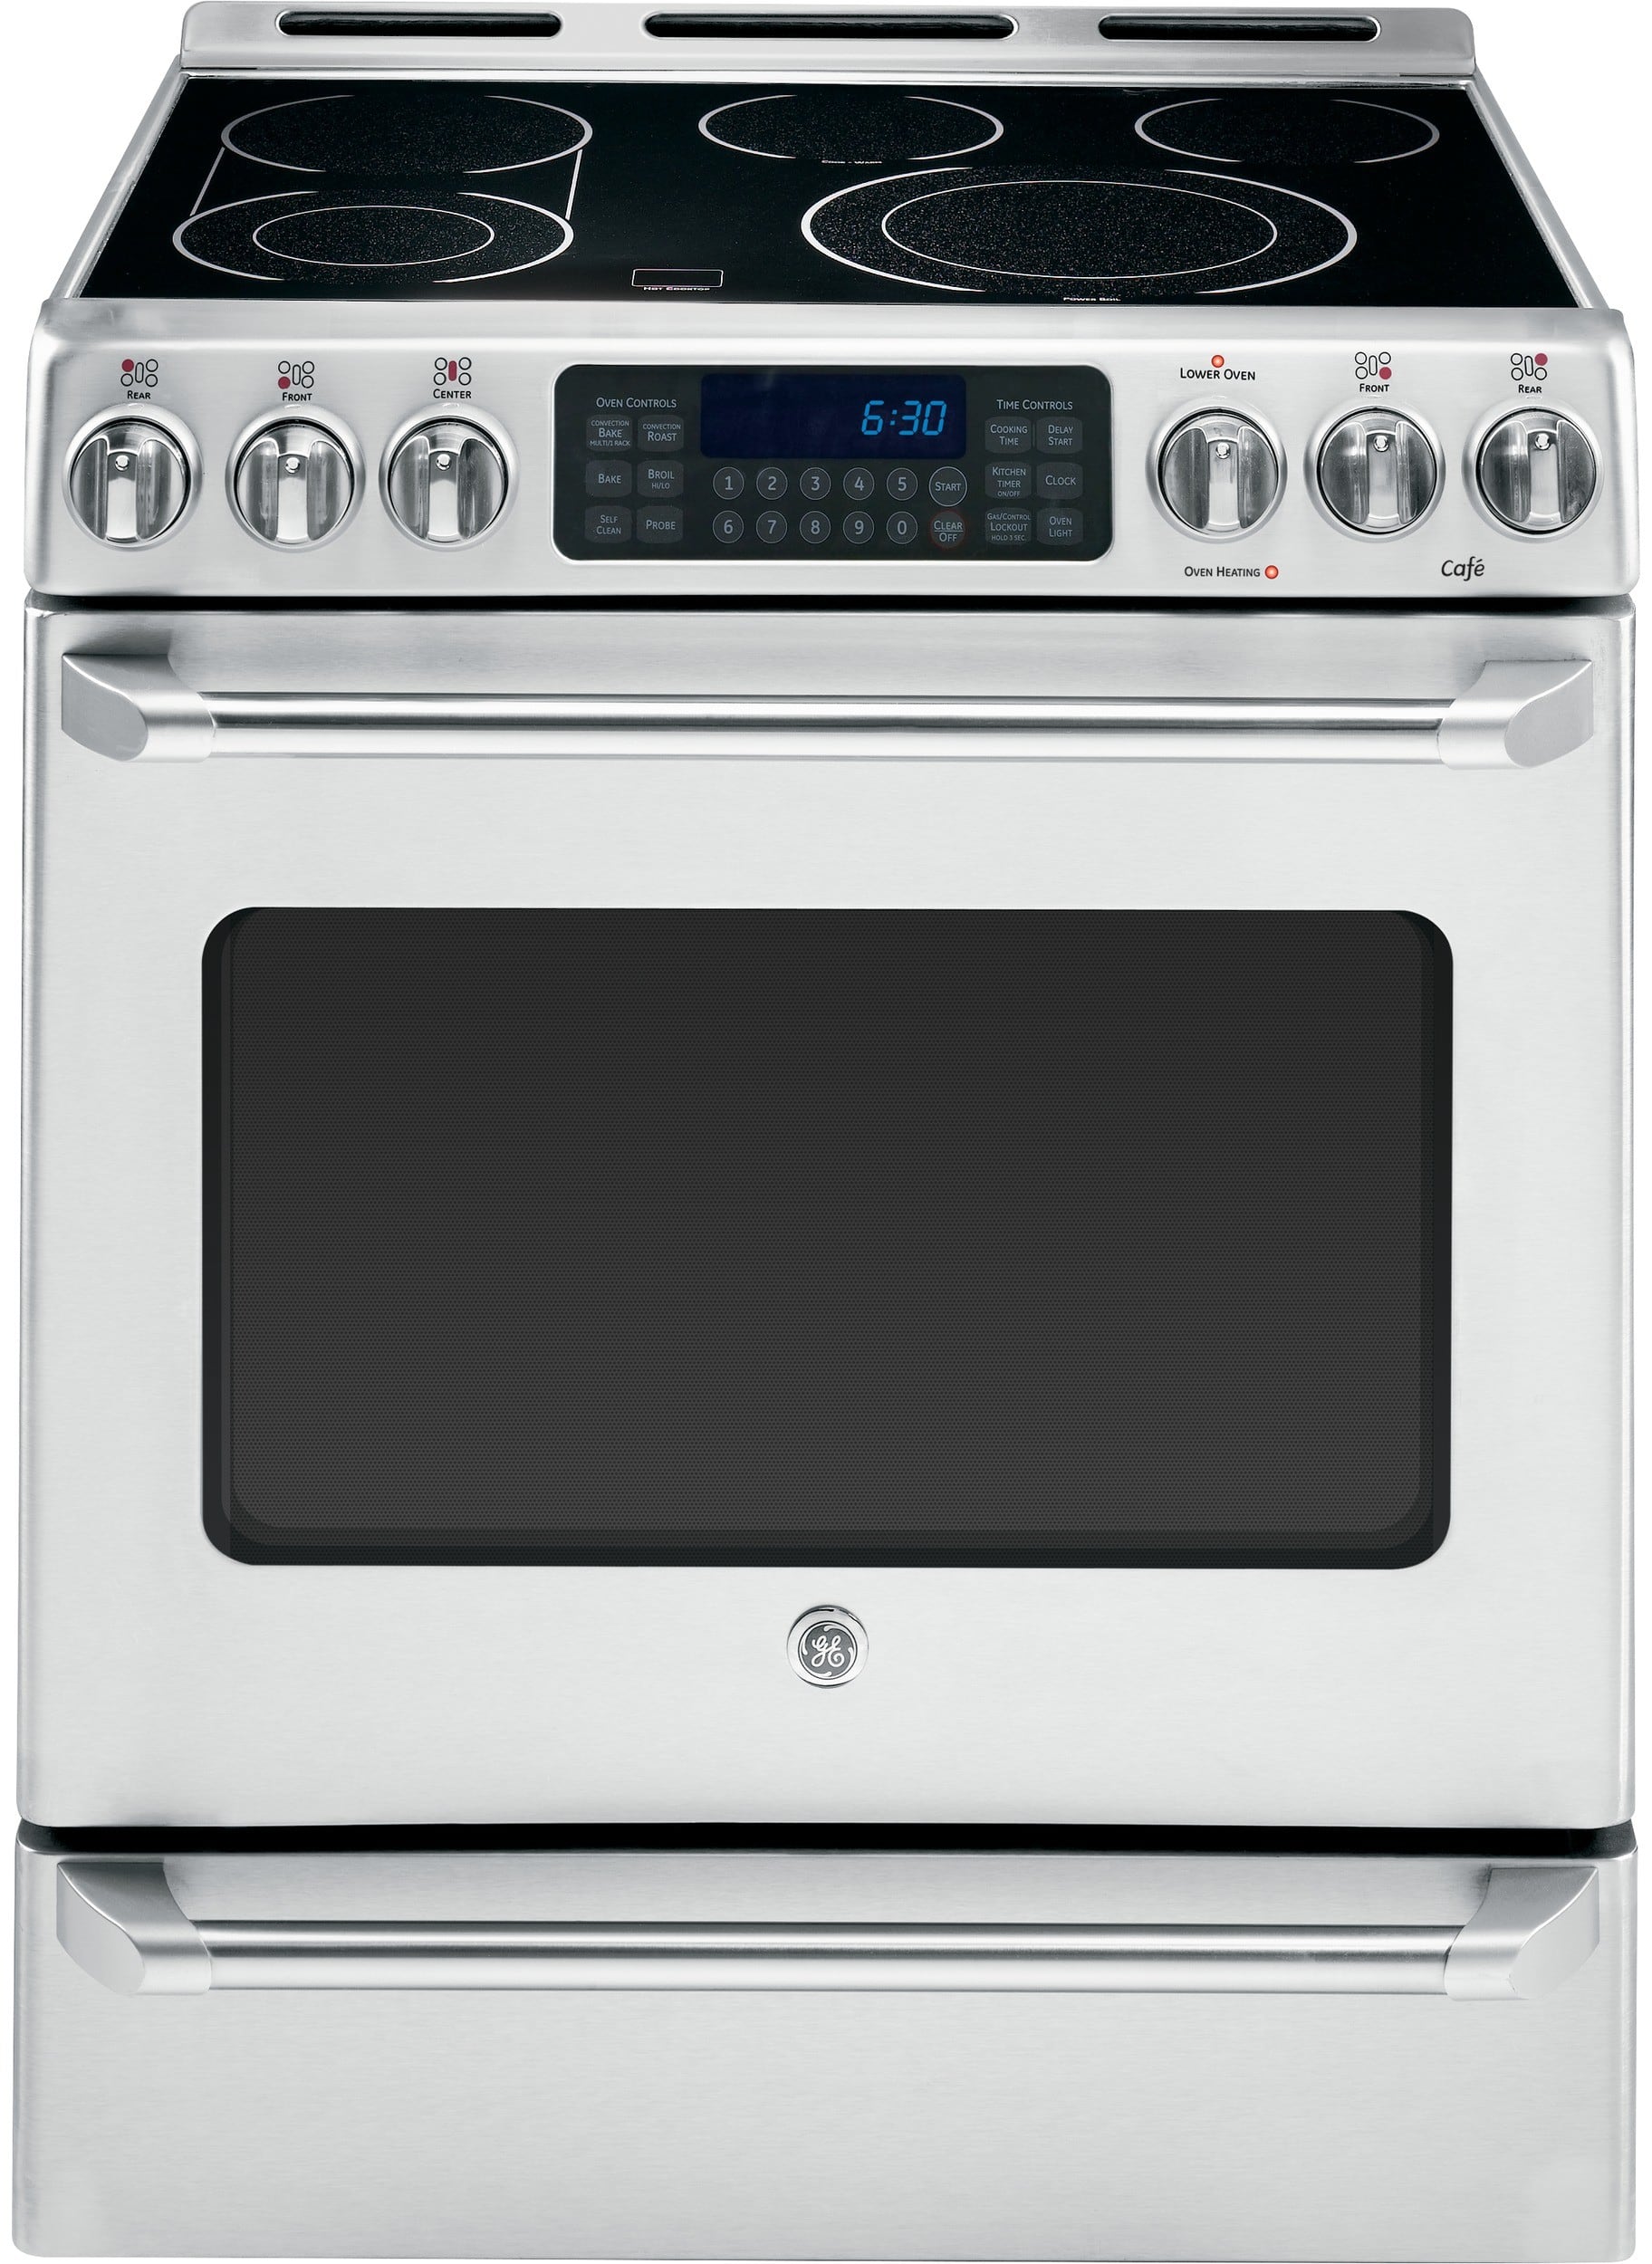 GE CS980STSS 30 Inch Slidein Electric Range with True Convection